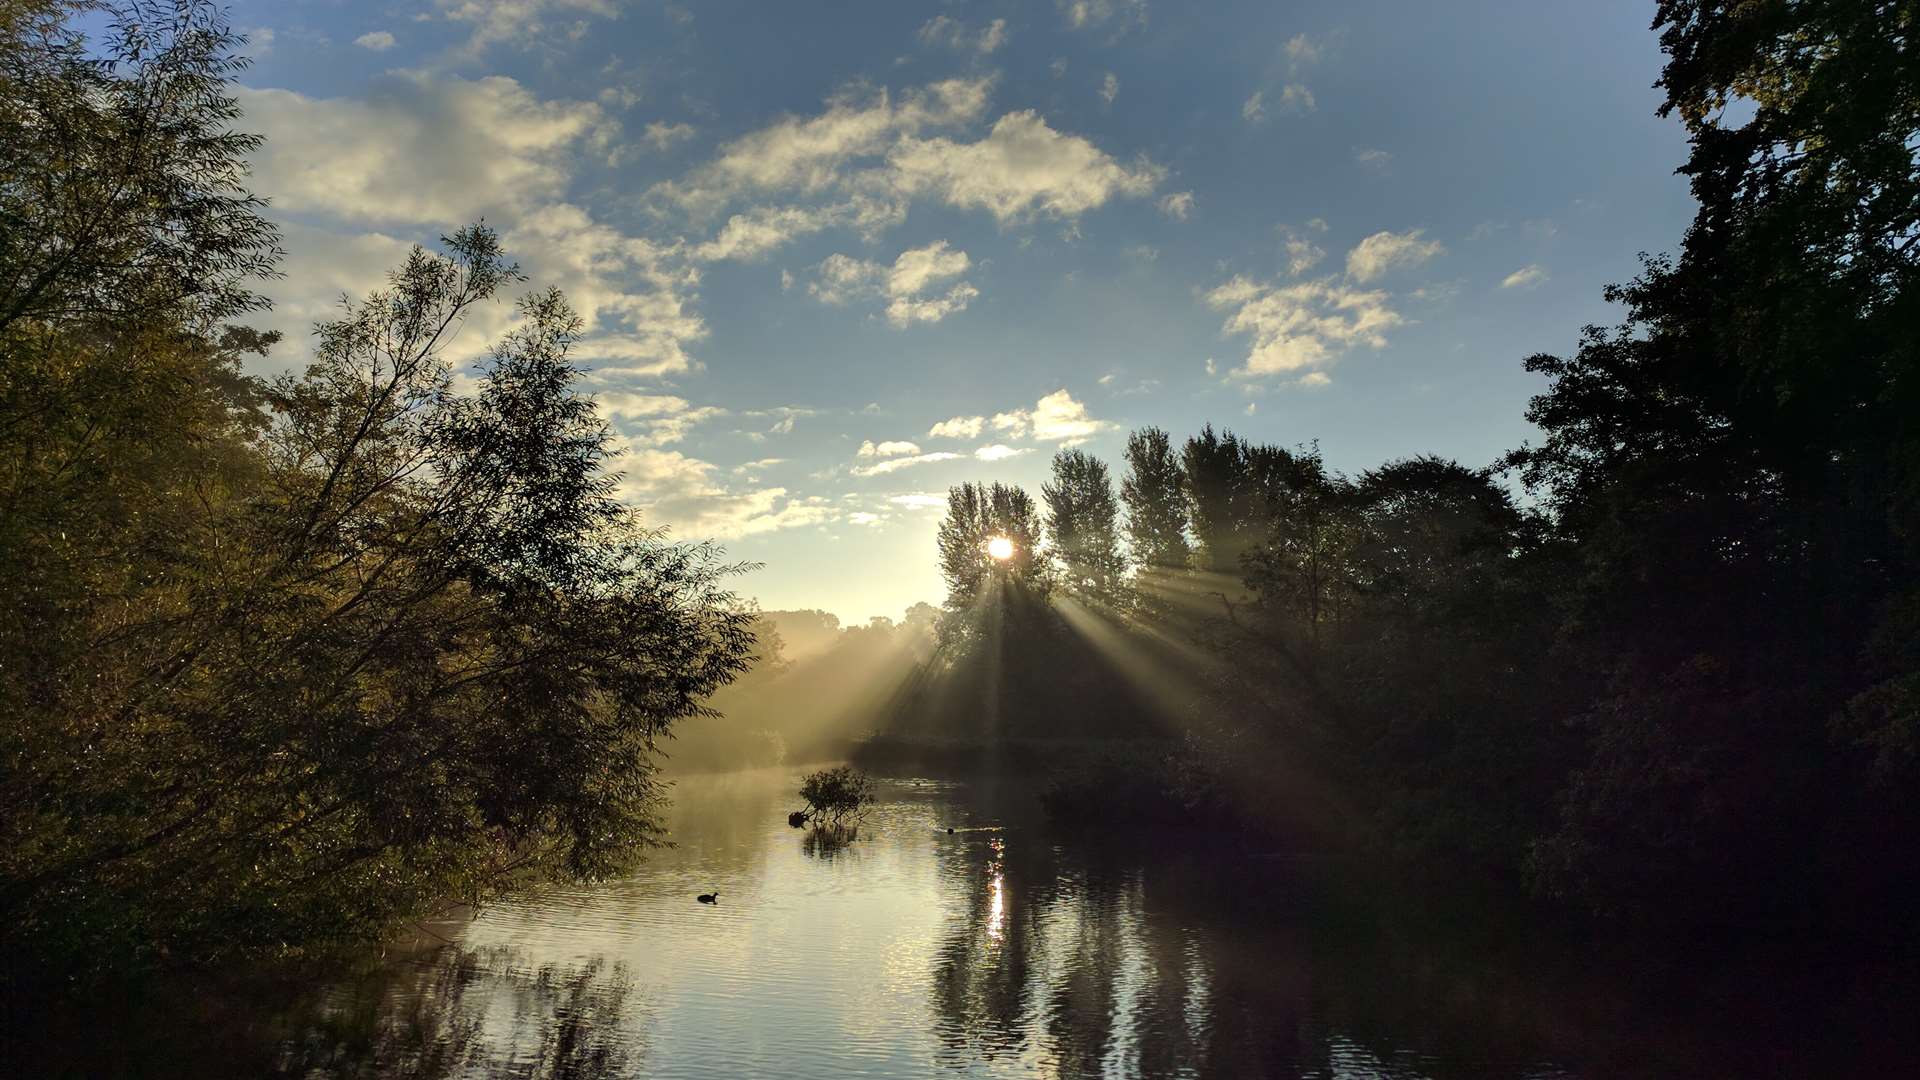 Mark Checksfield's photo of the lake at Mote Park won the Landscape category of the photographic competition